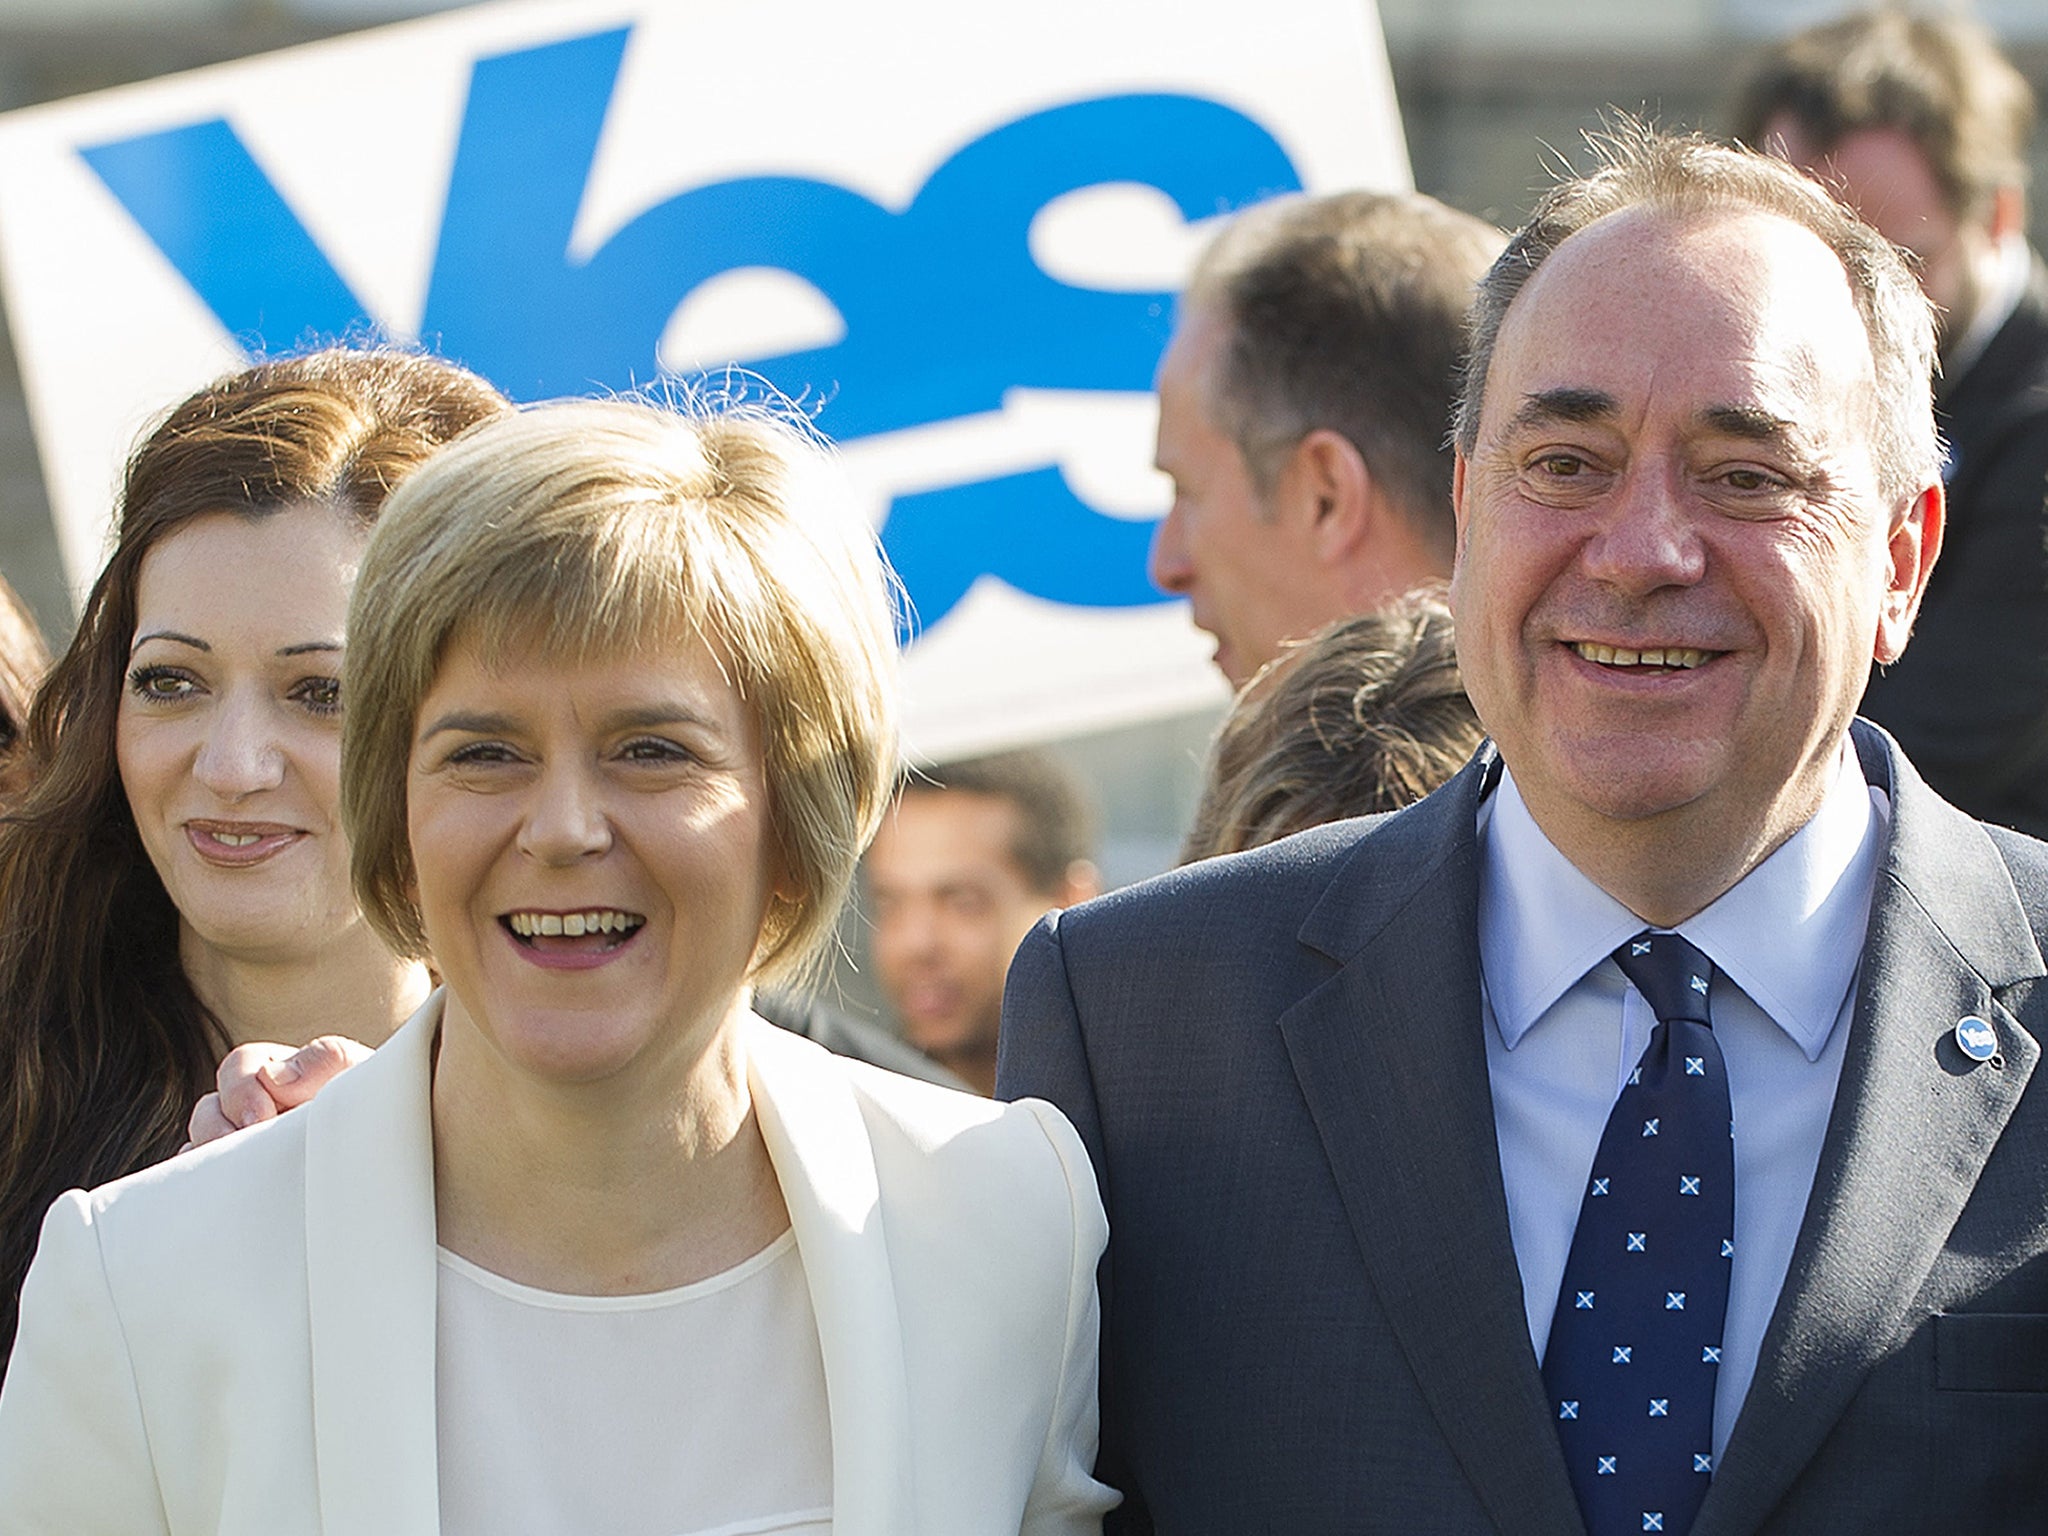 Alex Salmond fell on his sword last month, making Nicola Sturgeon the clear frontrunner to replace him